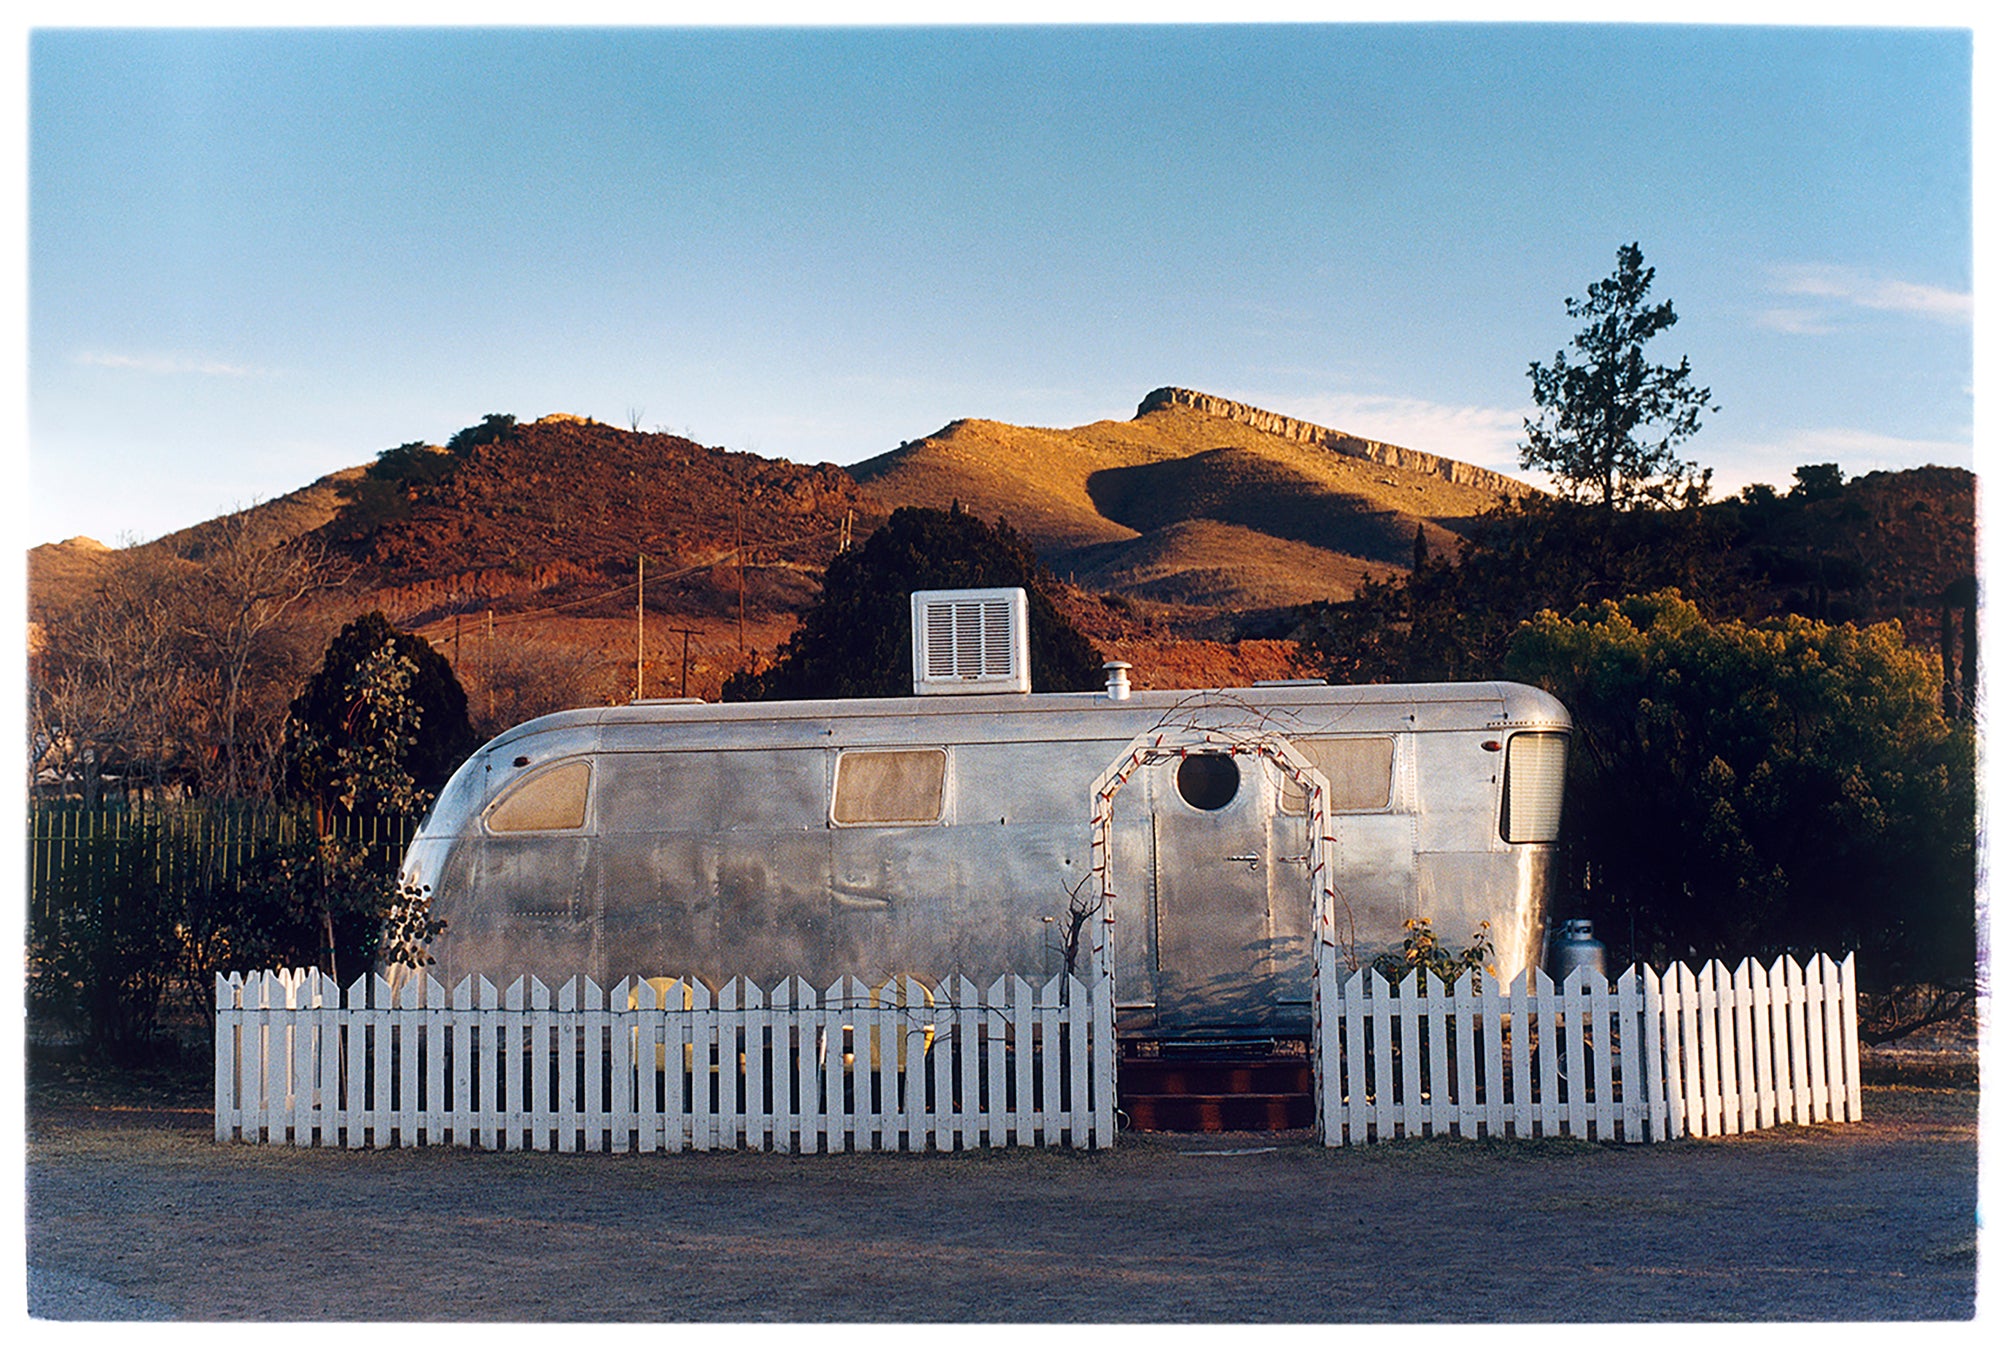 This artwork brings about a romantic dream of living in an RV. Captured in the morning sun at the start of a beautiful Arizona day, this RV is surrounded by both a white picket fence and a beautiful landscape, with the sun tickling the hilltops. Photographed as part of Richard Heeps' 'Dream in Colour' series.